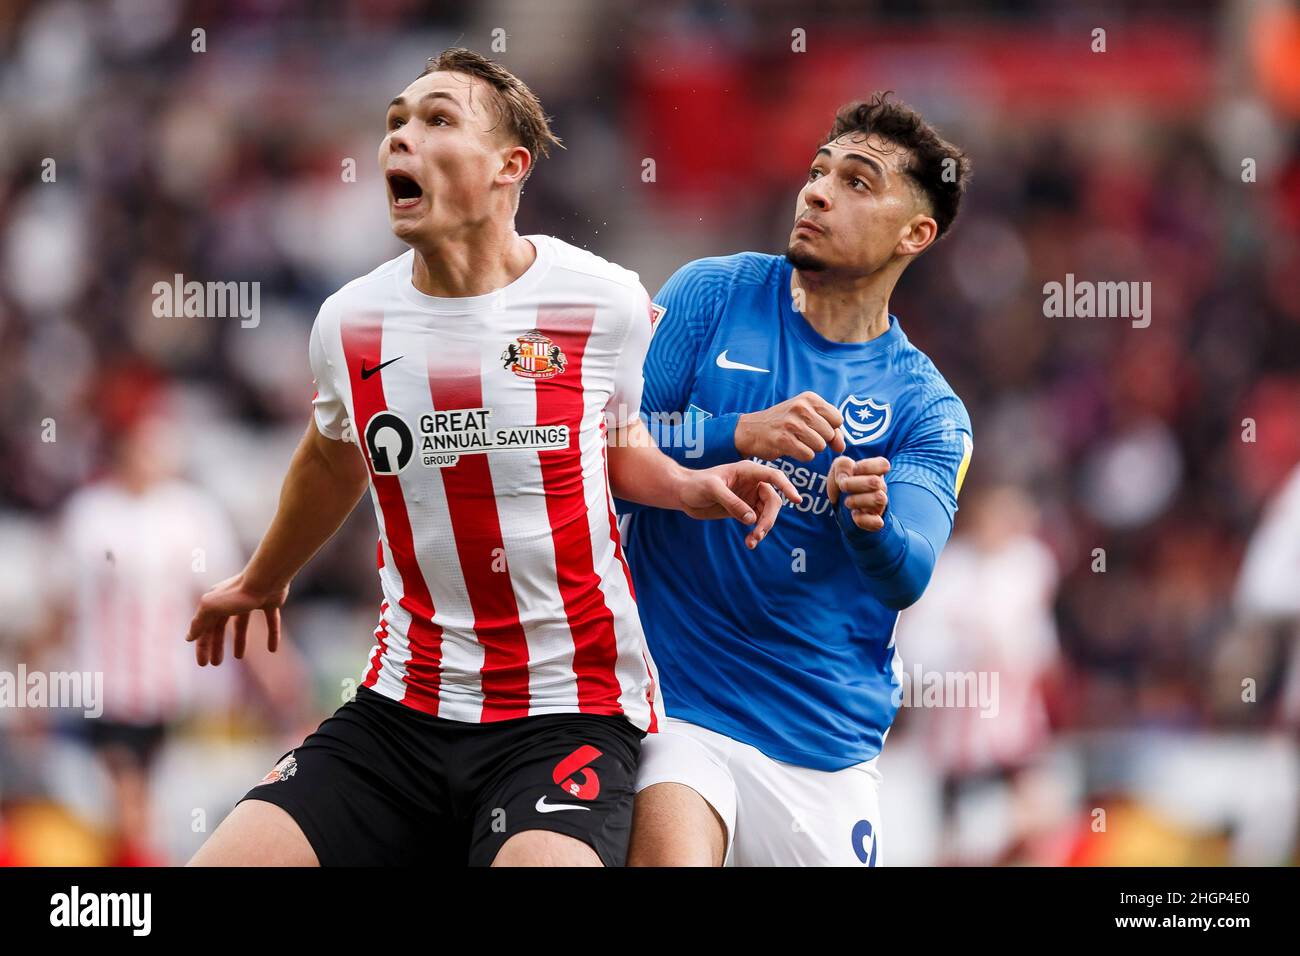 Sunderland, UK. 22nd Jan, 2022. Callum Doyle of Sunderland and Tyler Walker of Portsmouth during the Sky Bet League One match between Sunderland and Portsmouth at Stadium of Light on January 22nd 2022 in Sunderland, England. (Photo by Daniel Chesterton/phcimages.com) Credit: PHC Images/Alamy Live News Stock Photo